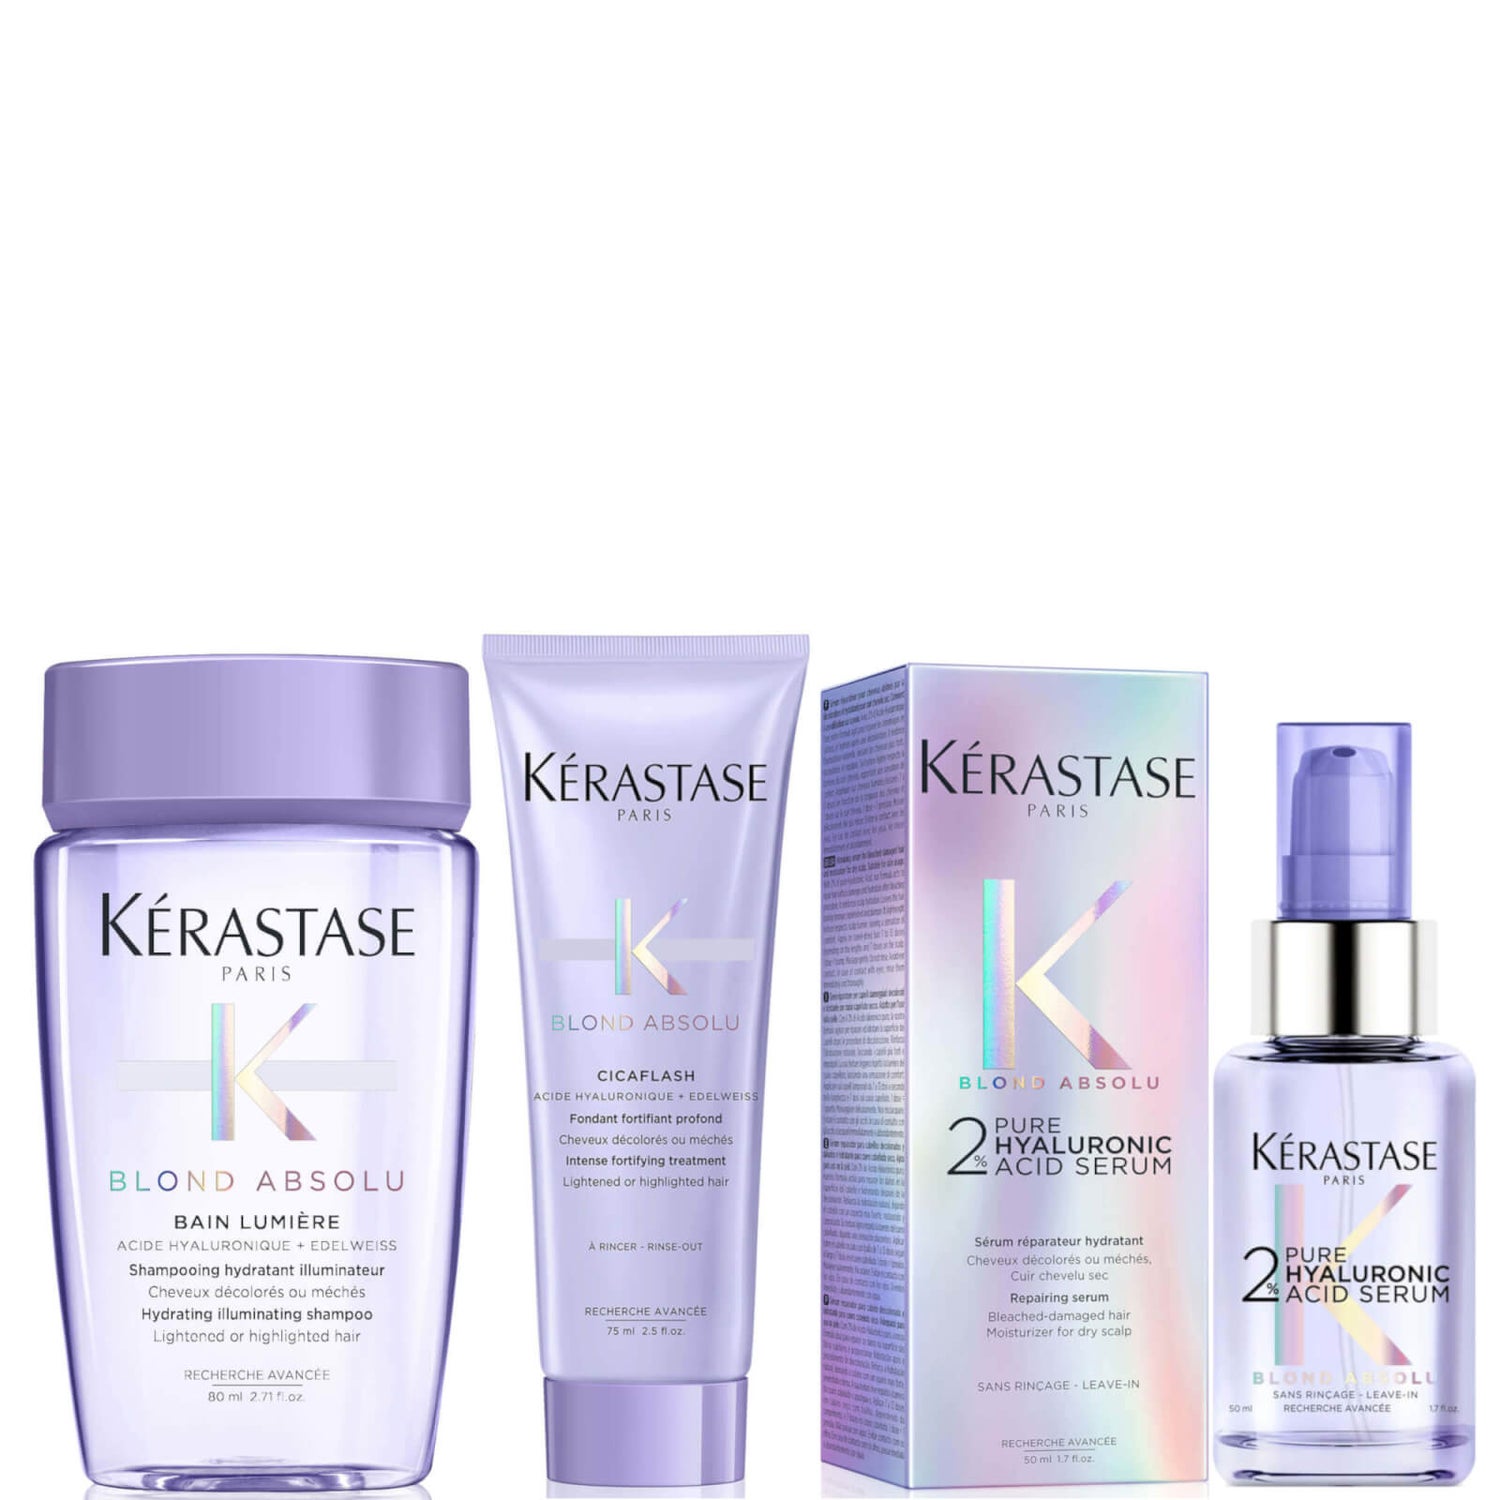 Kérastase Blond Absolu 2% Pure Hyaluronic Acid Scalp and Hair Serum 50ml with Travel Size Duo (Worth £65.16)